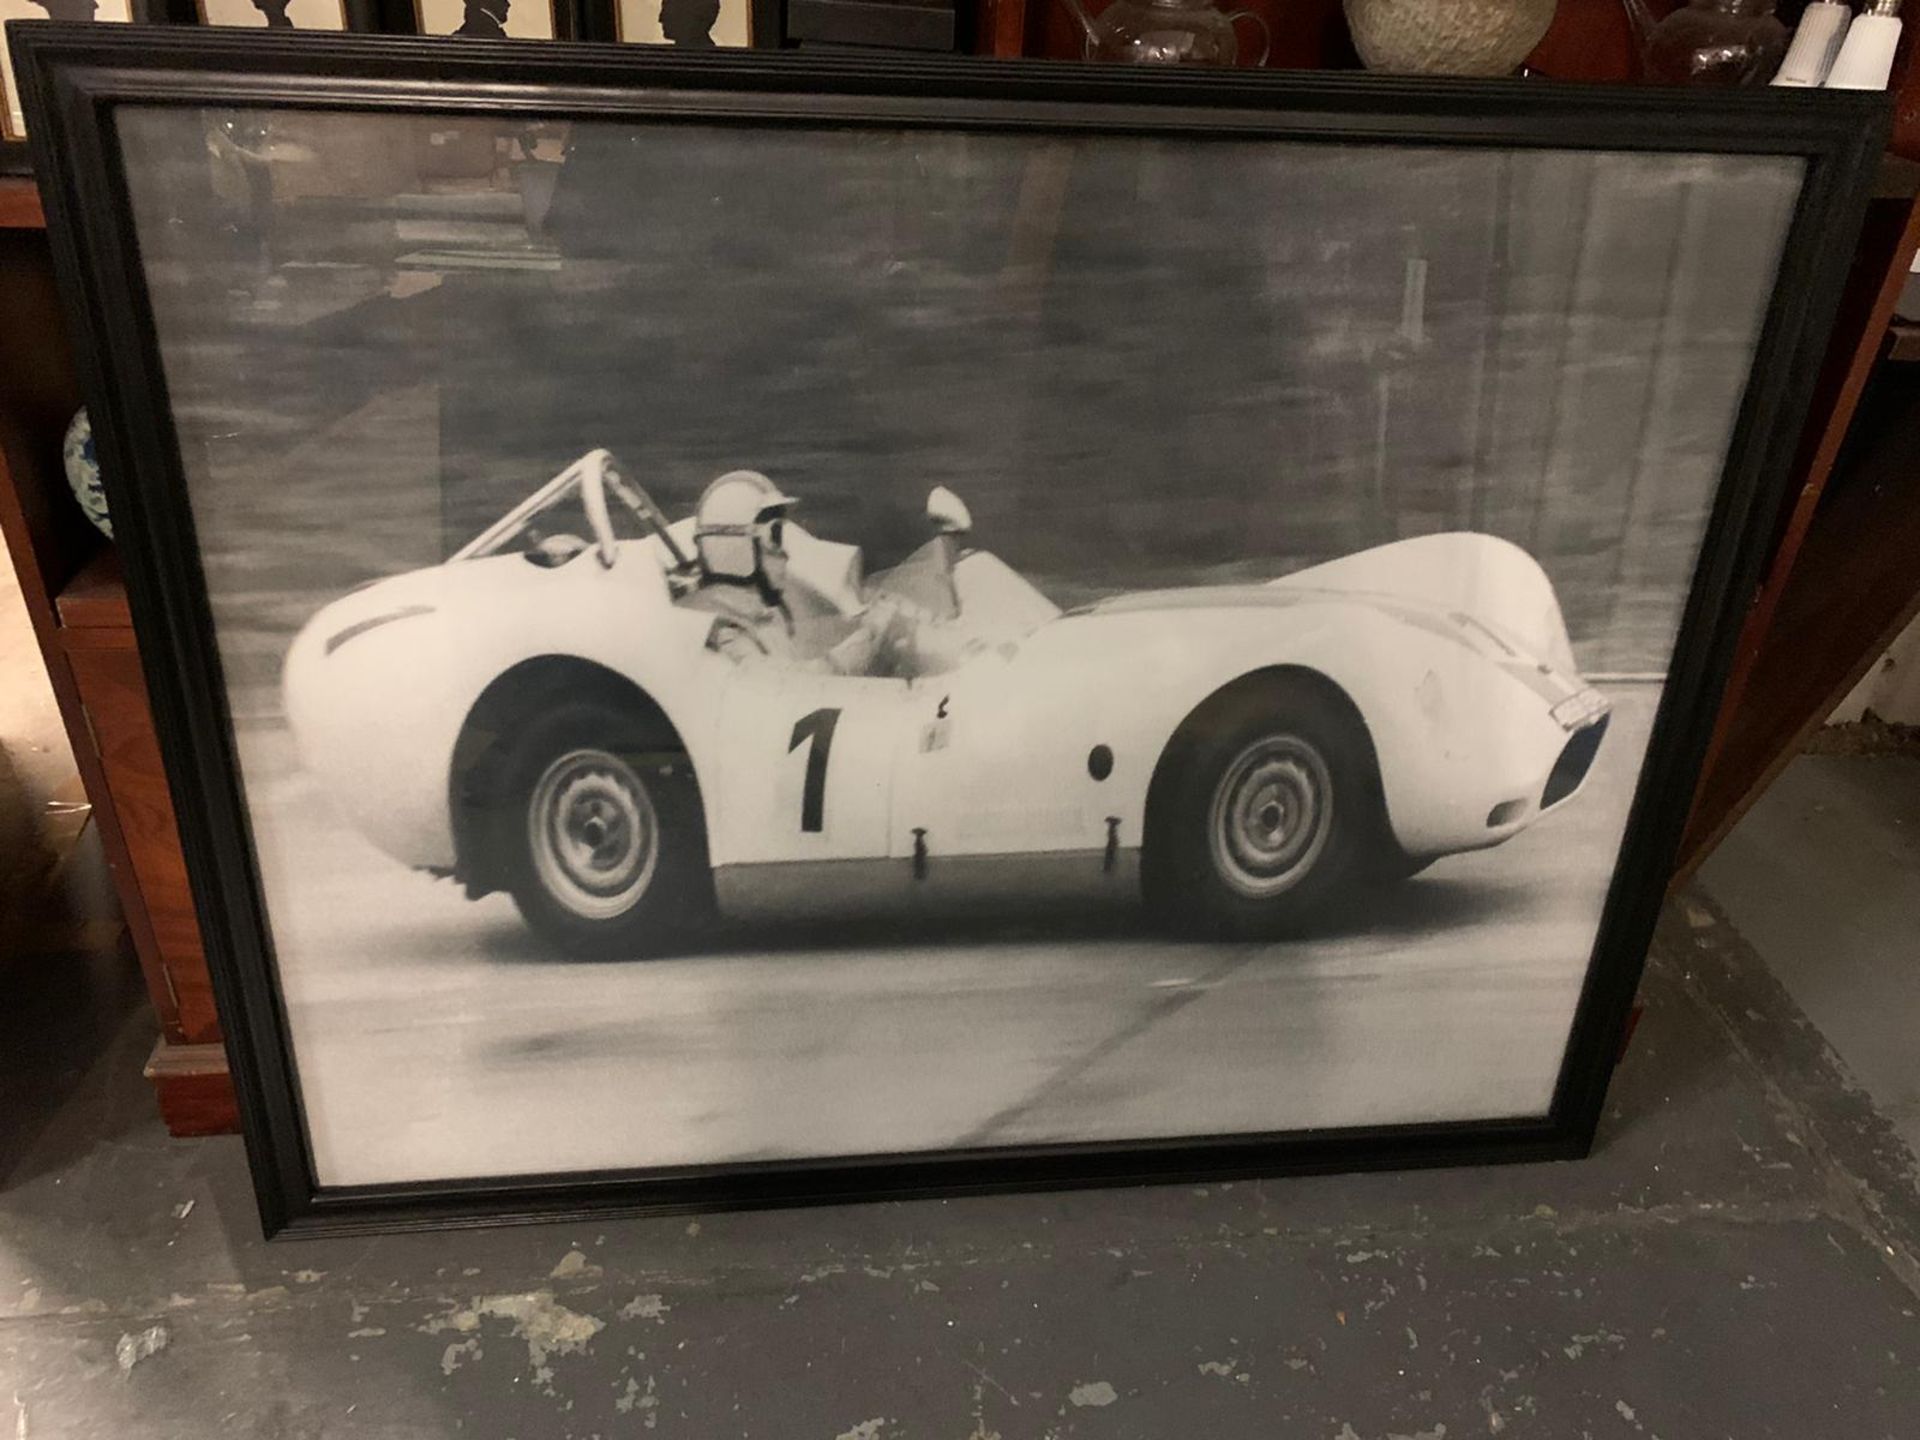 Timothy Oulton Race Car Wall Art Image Of Car No. 1 Is A 1958 Lister Jaguar Prototype Fitted With - Image 2 of 3